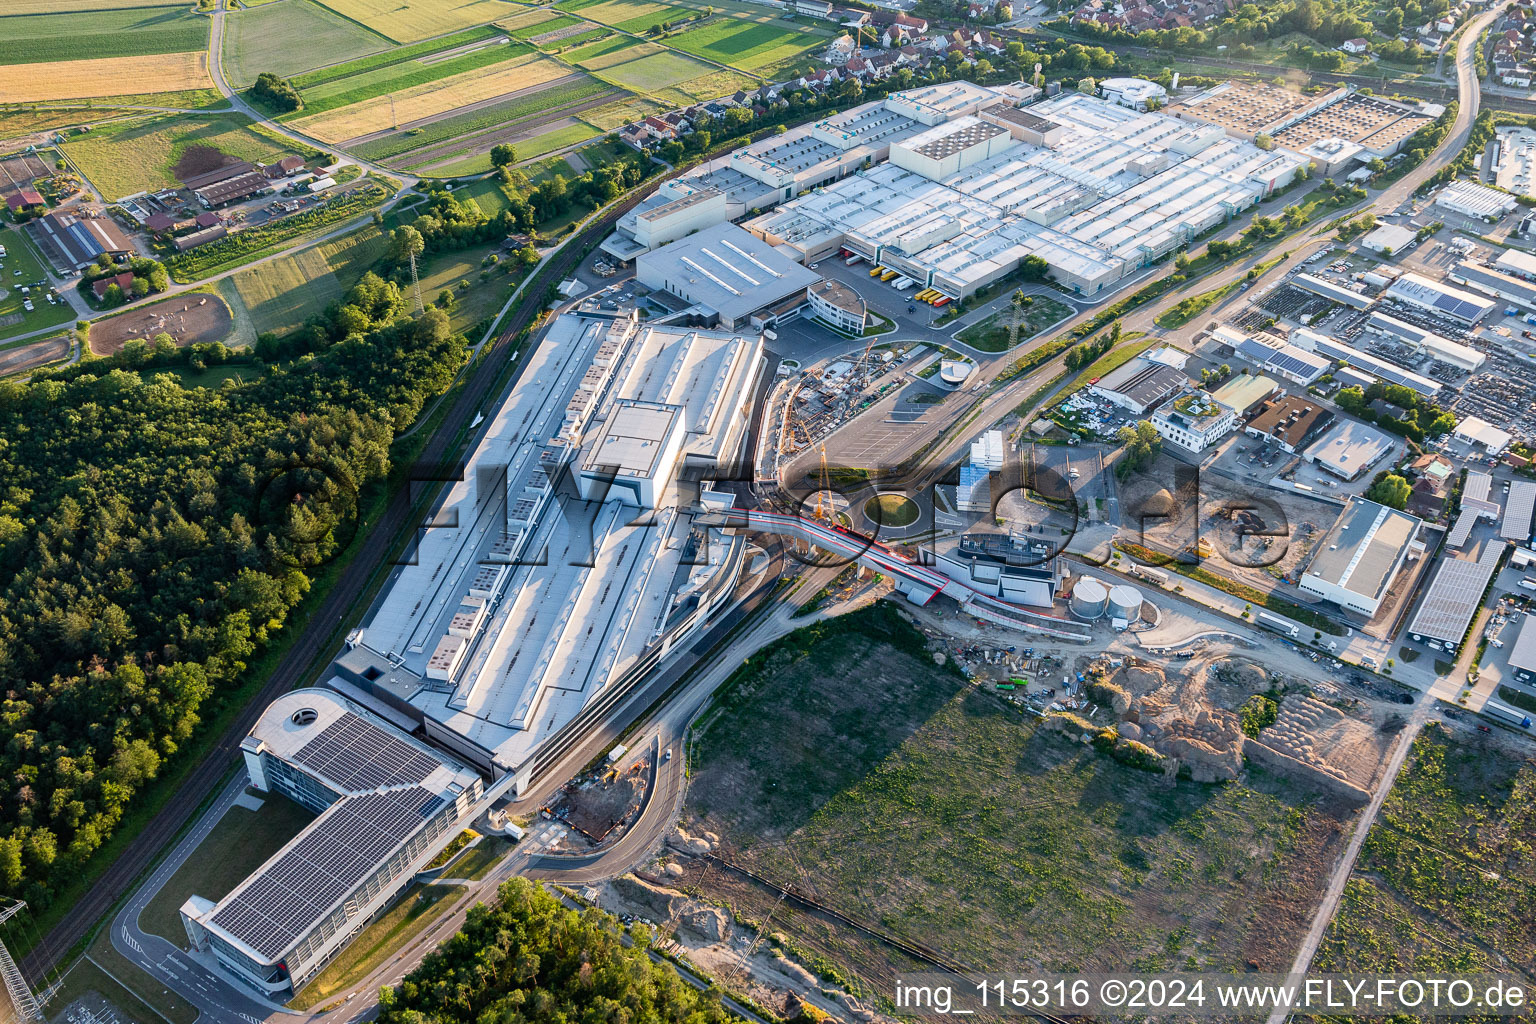 Aerial view of Factory premises of SEW-EURODRIVE GmbH & Co KG in Graben-Neudorf in the state Baden-Wurttemberg, Germany